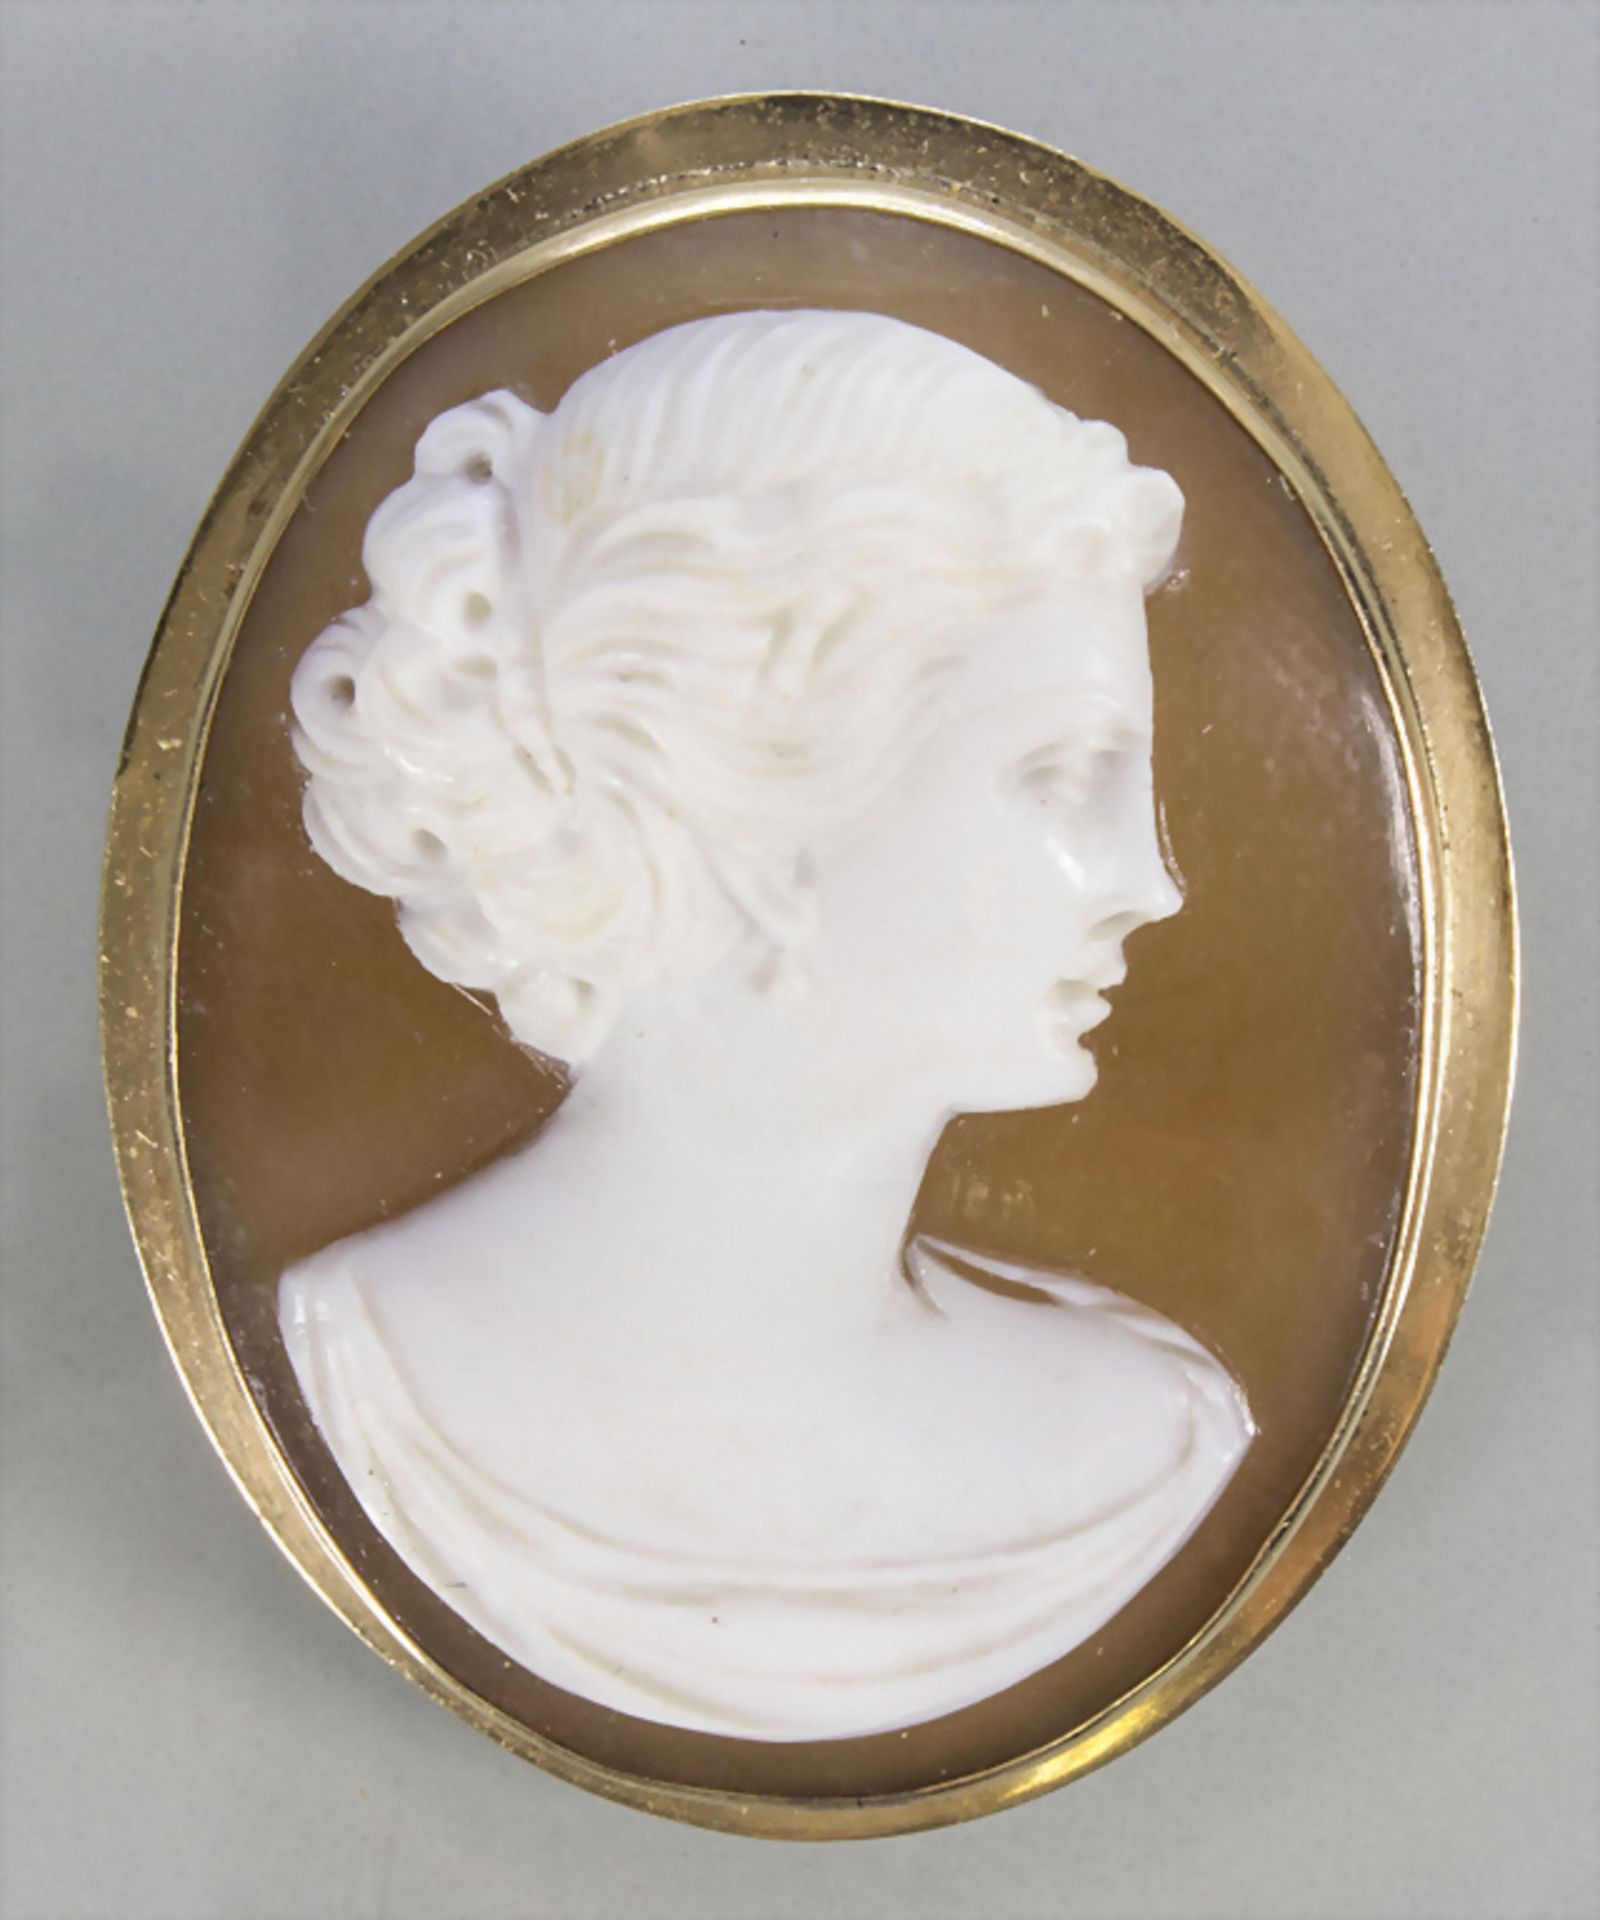 Goldanhänger mit Kammee / A gold pendant with cameo